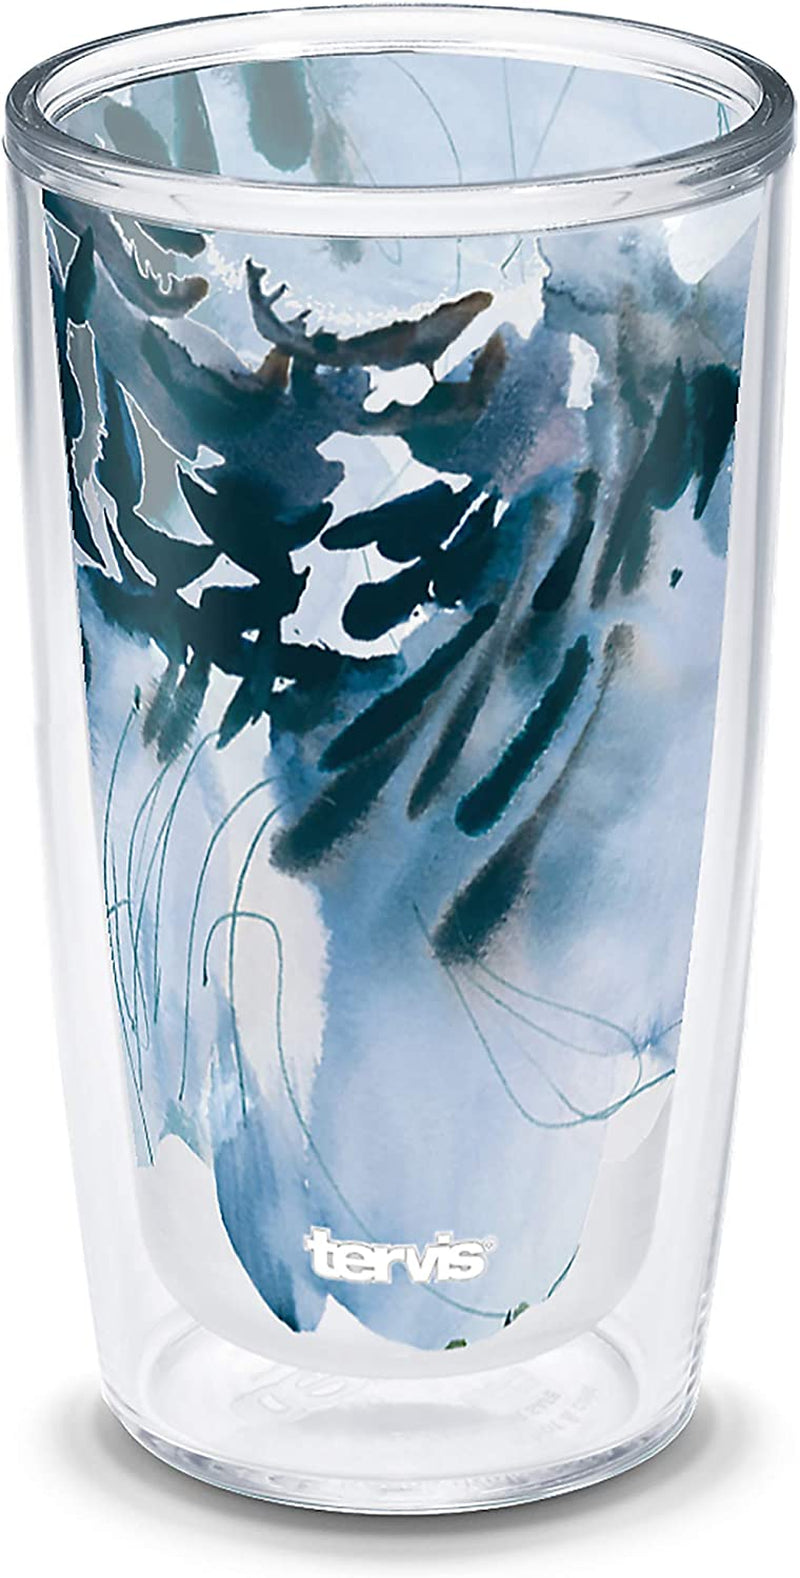 Tervis Made in USA Double Walled Kelly Ventura Insulated Tumbler Cup Keeps Drinks Cold & Hot, 16Oz 4Pk, Hillside Home & Garden > Kitchen & Dining > Tableware > Drinkware Tervis Bloom Slate 16oz 